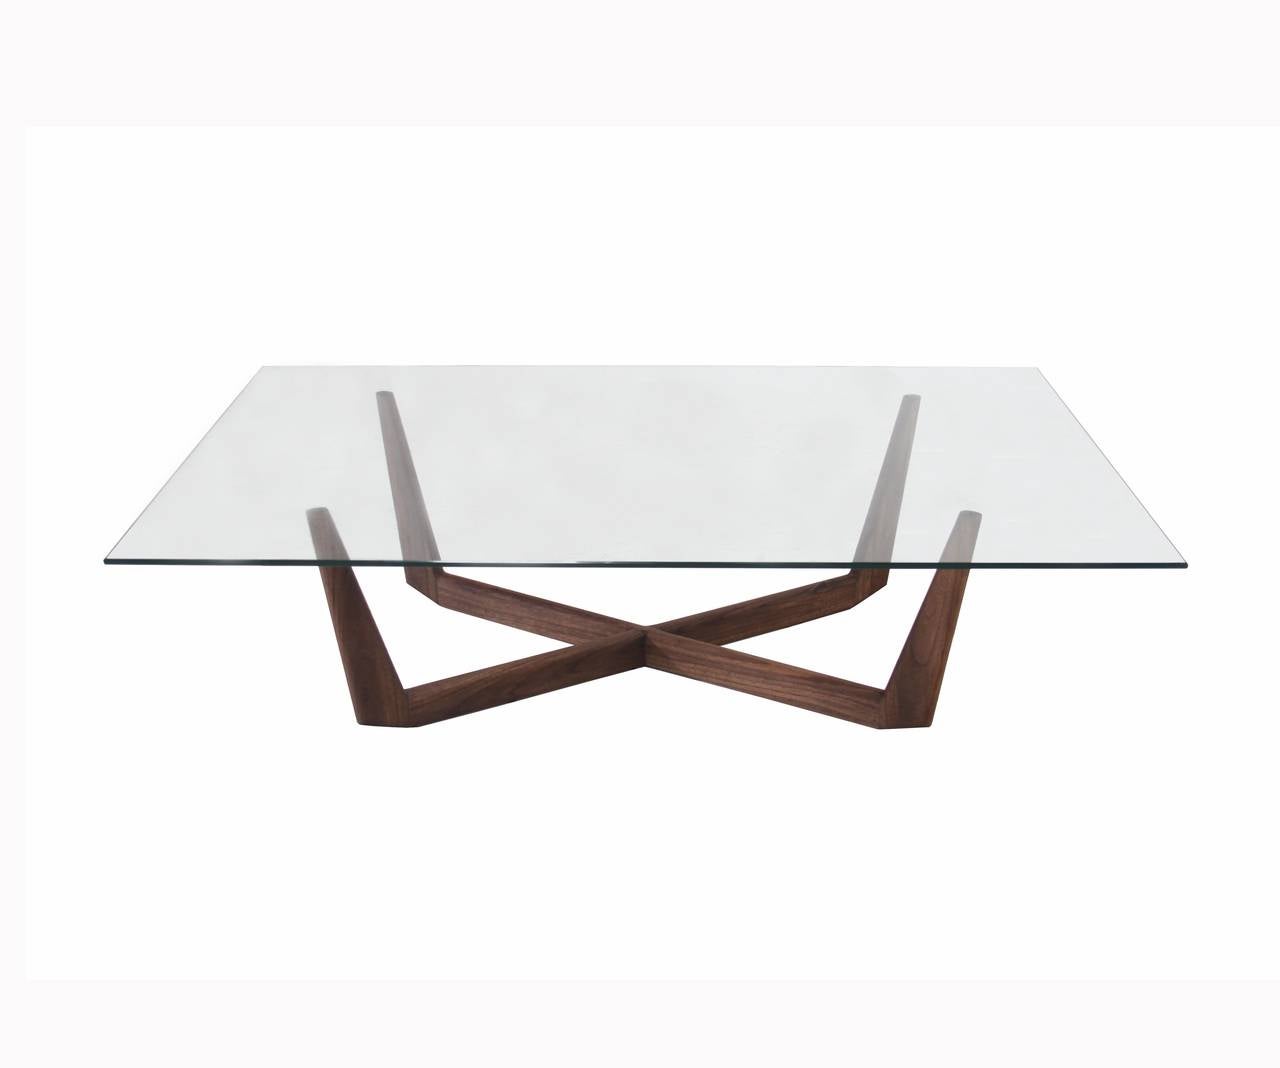 A solid Walnut sculptural base coffee table supporting a rectangular glass top. The size of the glass top can be changed if needed.

This item is available immediately 

NOTE: The oil finishes are flat, water proof and penetrate deeply, bonding